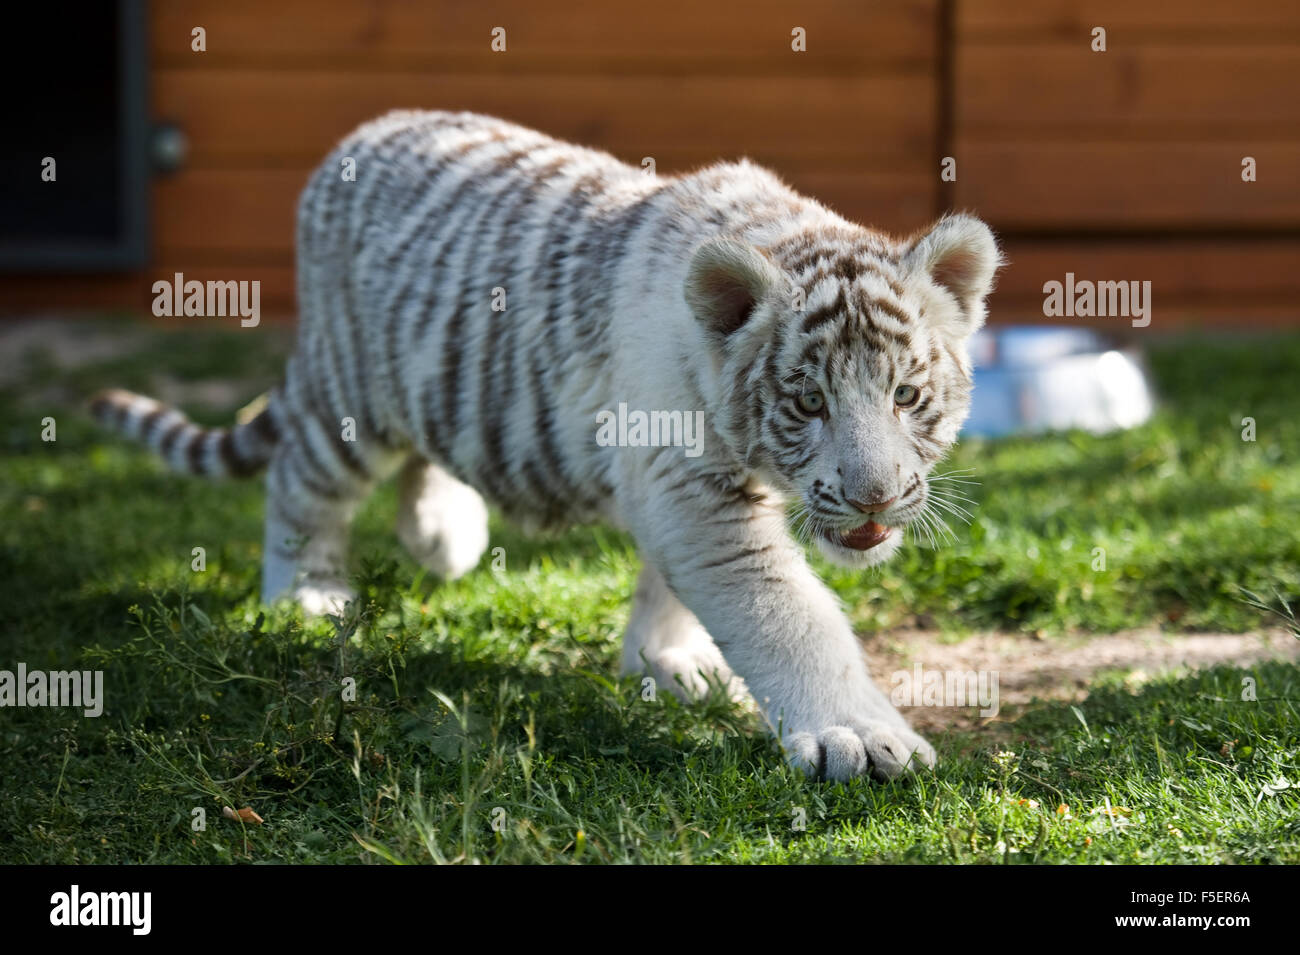 Young white Bengal tiger in captivity Stock Photo